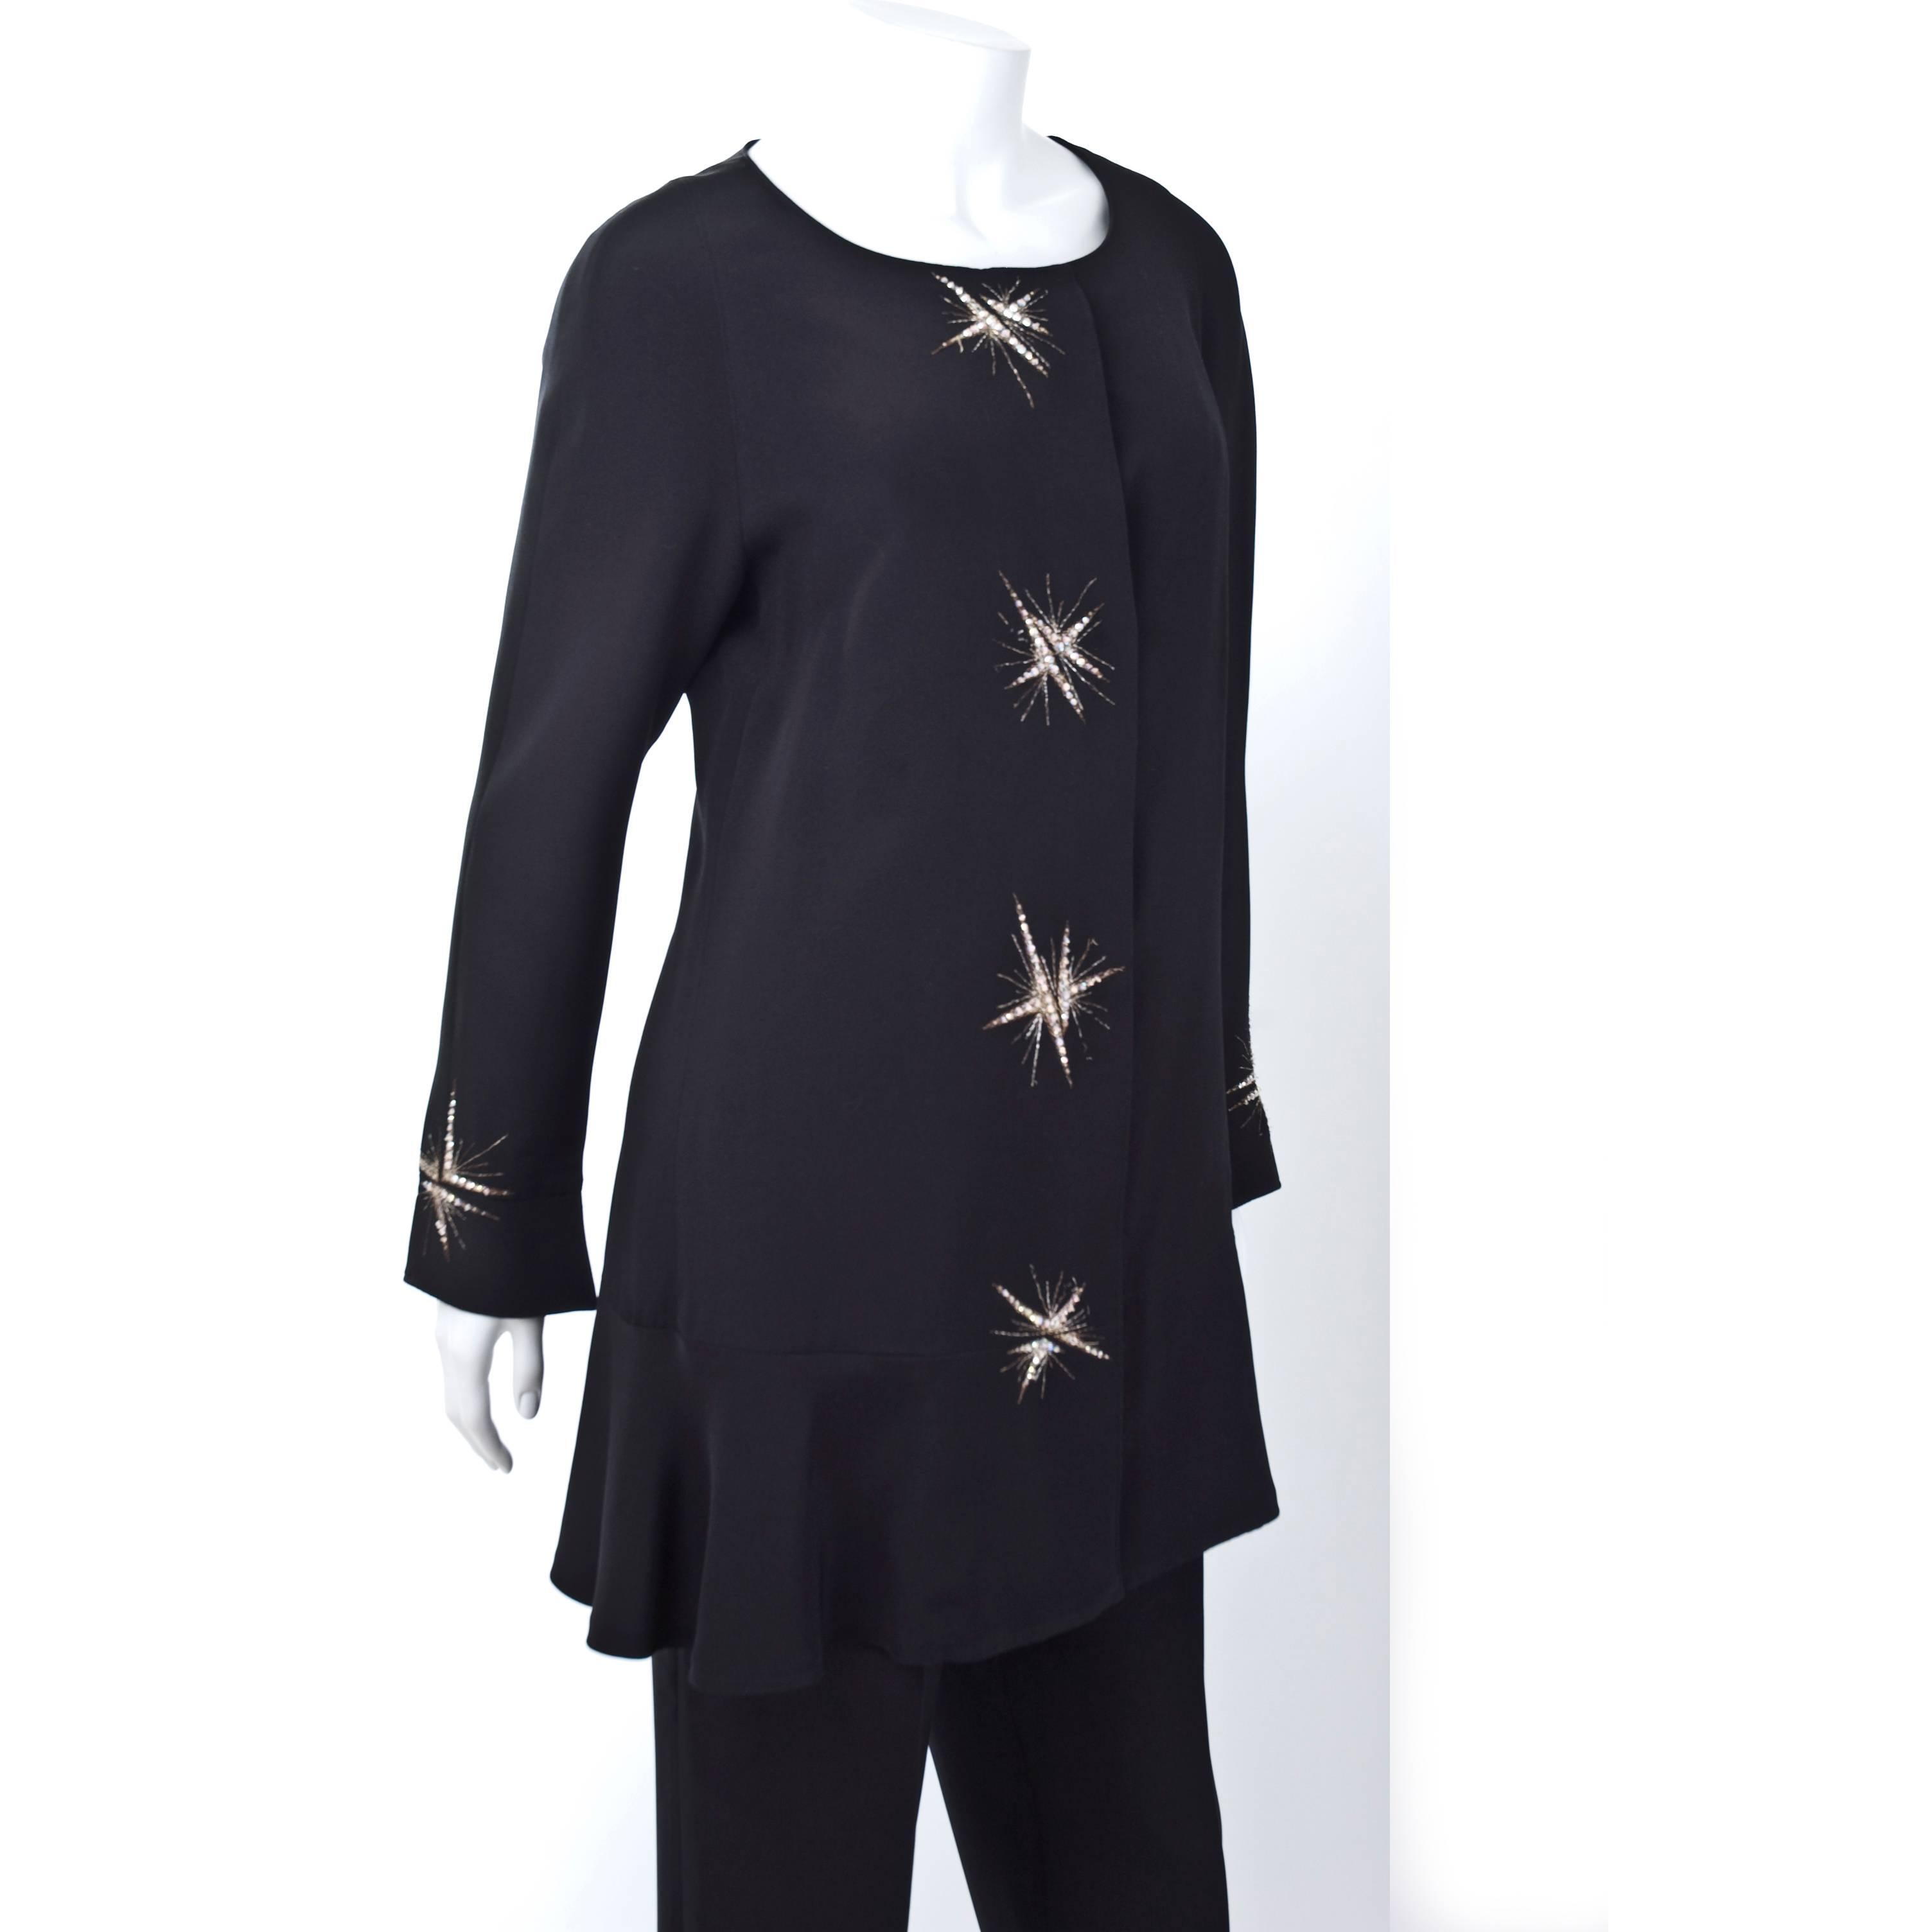 80s Chloe Black Evening Suit with Star Embroidery.
The jacket closure with snap buttons. The pant with turnups and elastic waist band.
Material is viscose.
Very good codition and has been dry cleaned.
Size label is missing - about 8 US Please see